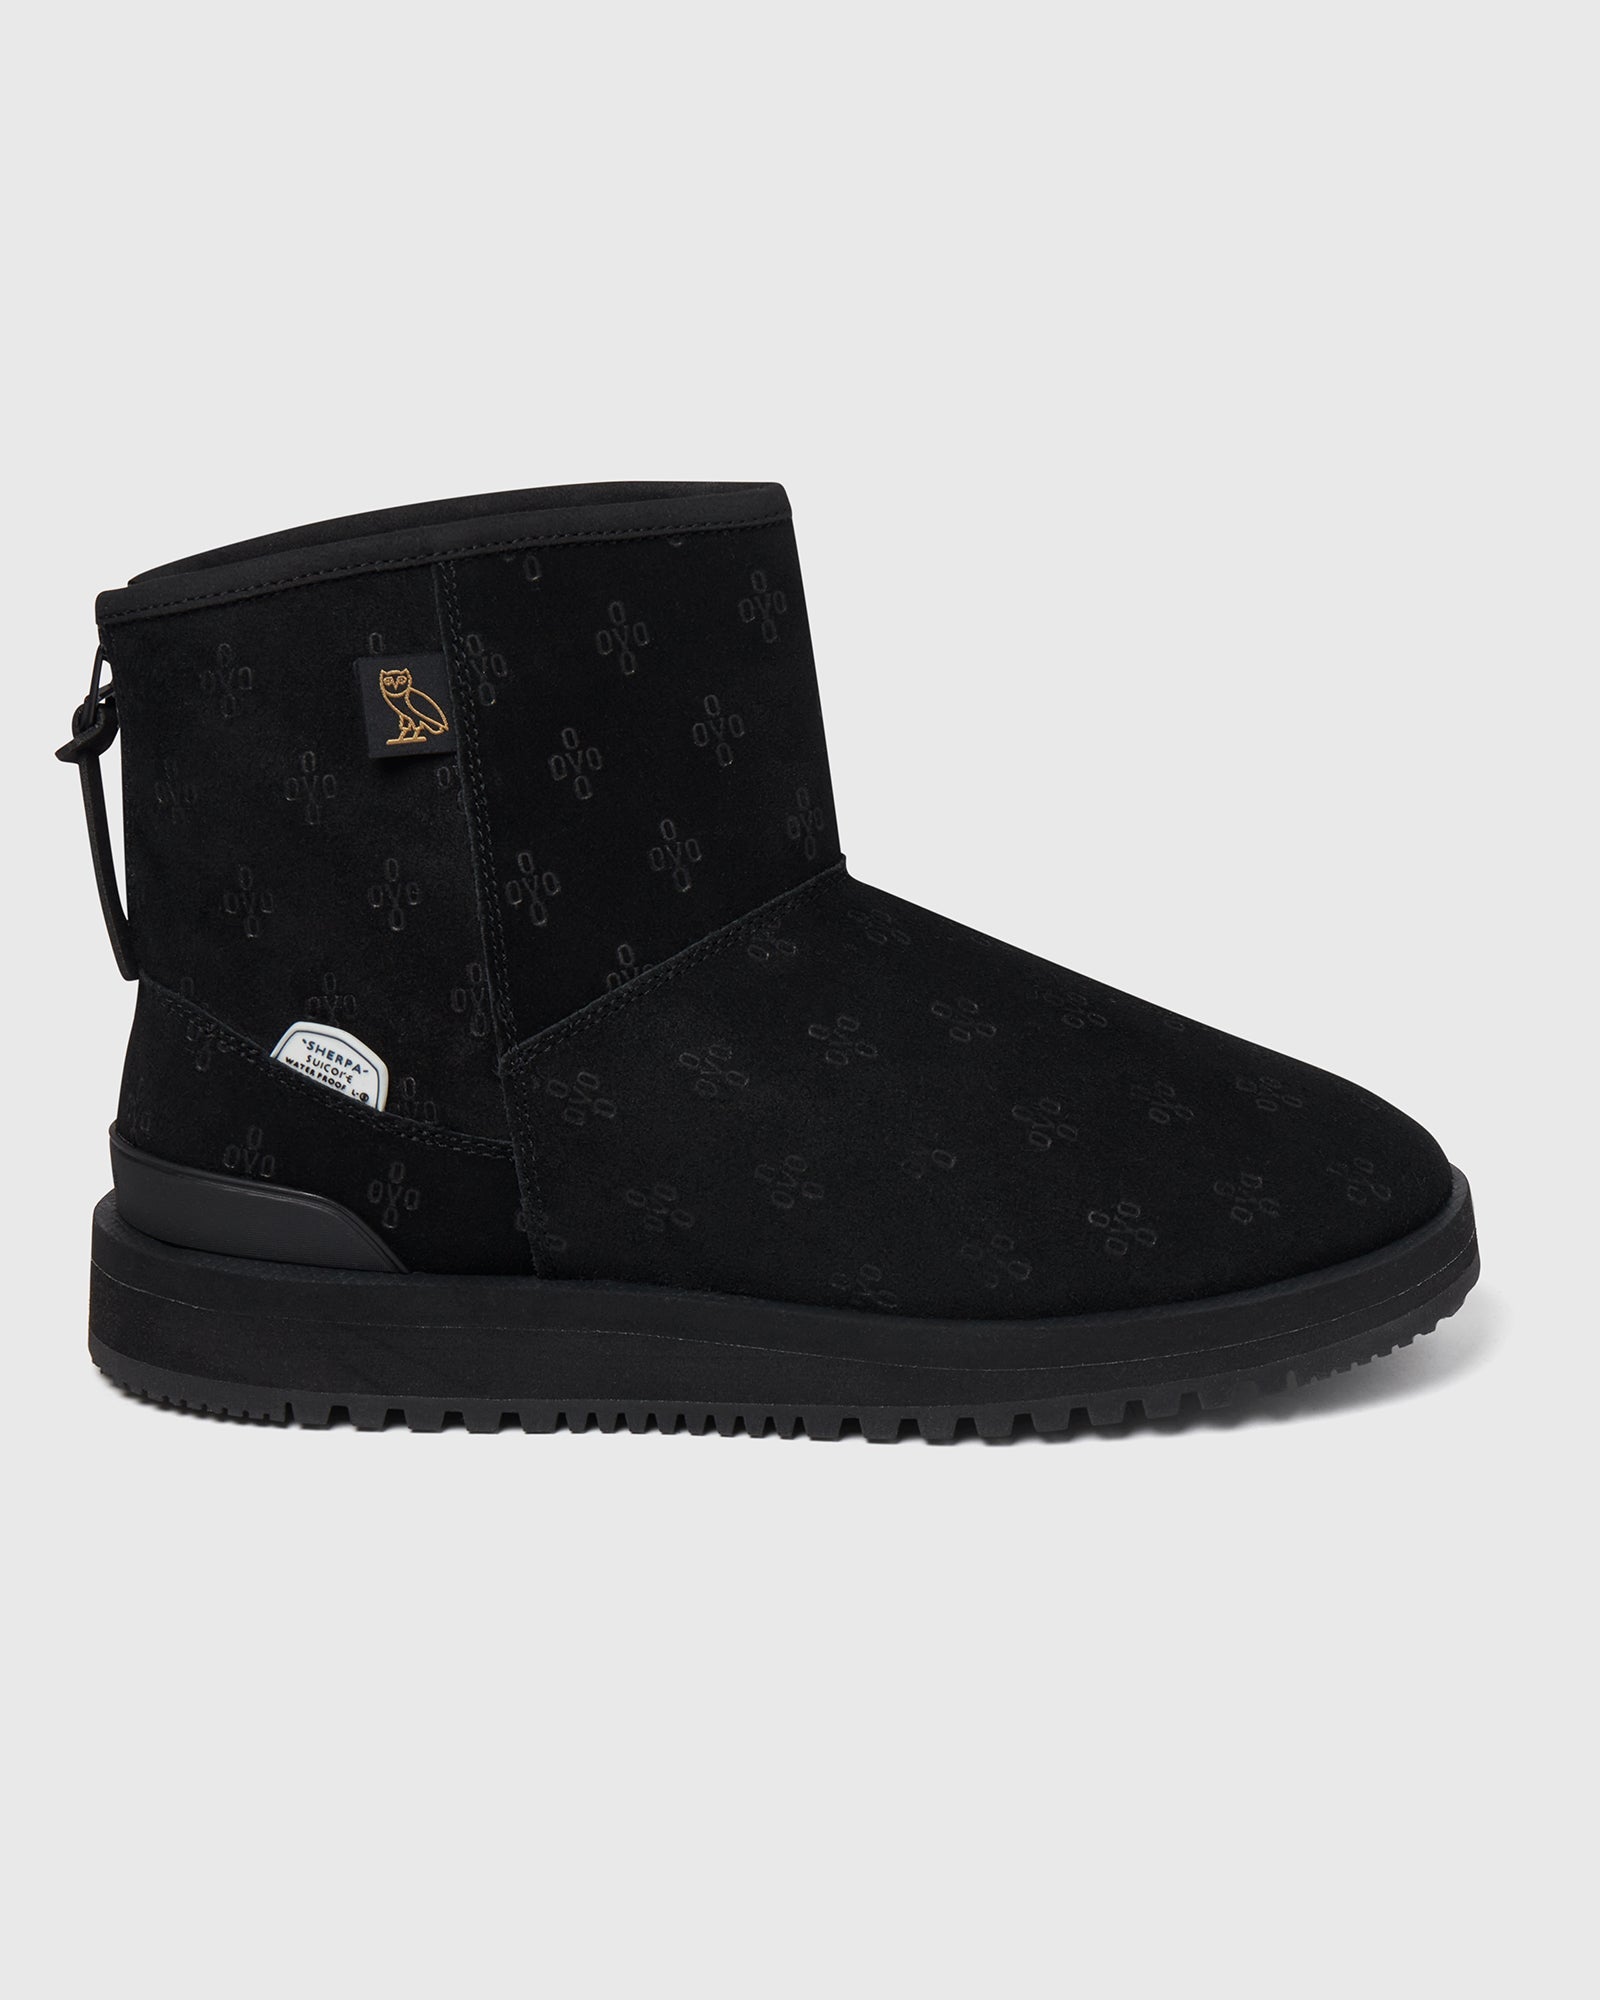 SUICOKE OVO Edition ELS-Mwpab-MID in Black OG-080MWPAB-OVO | Shop from eightywingold an official brand partner for SUICOKE Canada and US.